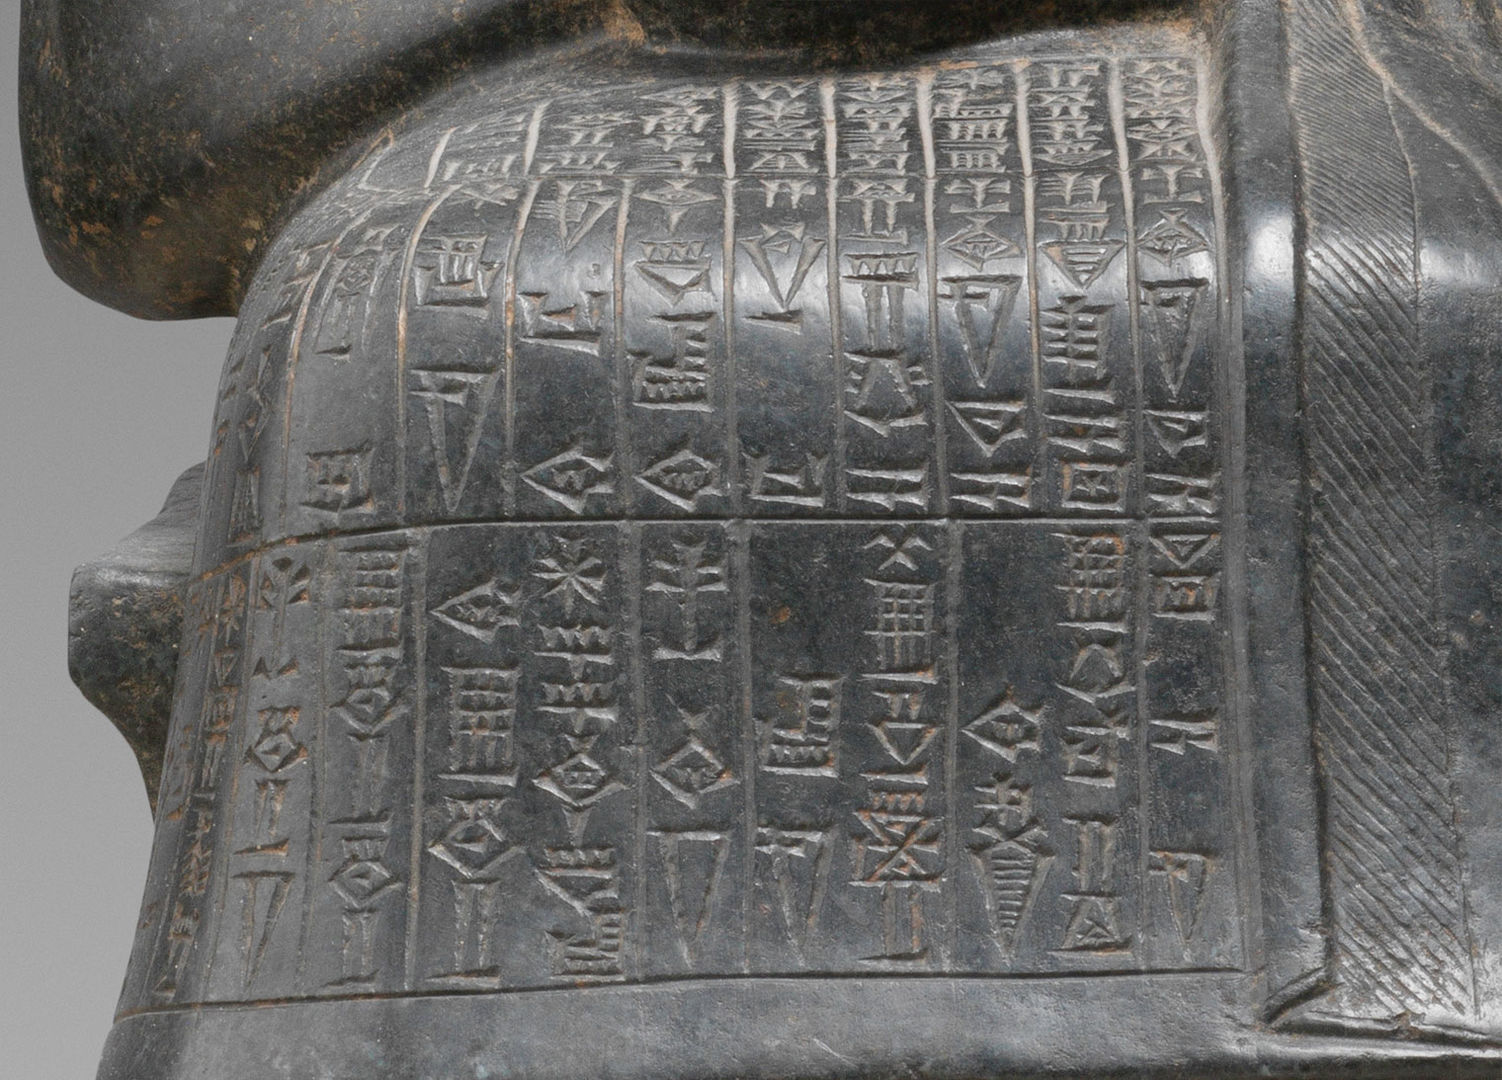 Detail of Statue of Gudea (59.2), showing cuneiform inscription that reads in part: “Gudea, the man who built the temple, may his life be long".